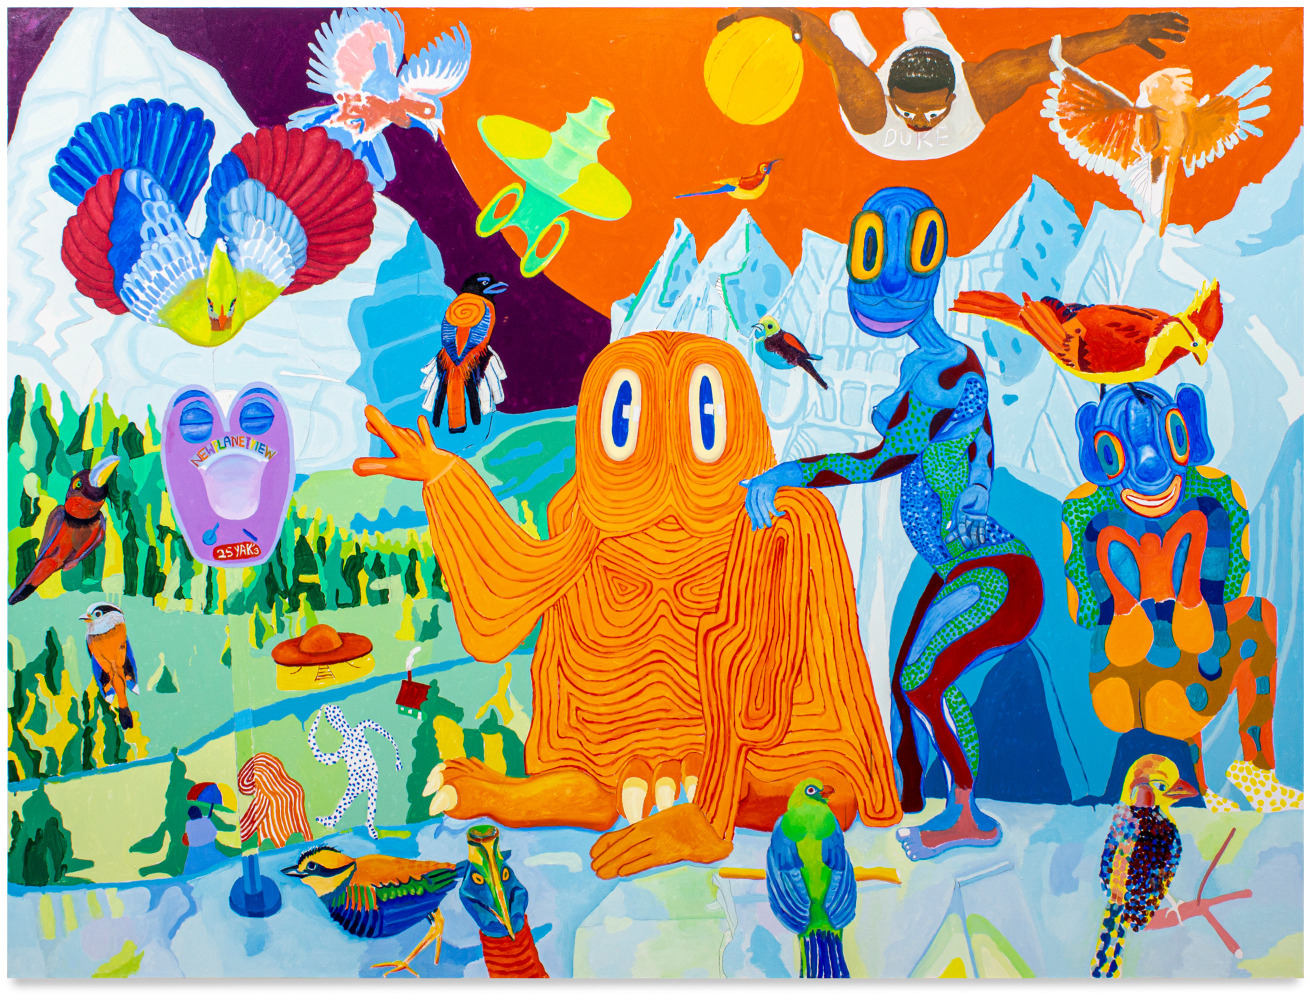 Peter Williams, As the Birds Fly, Another Planet, 2019